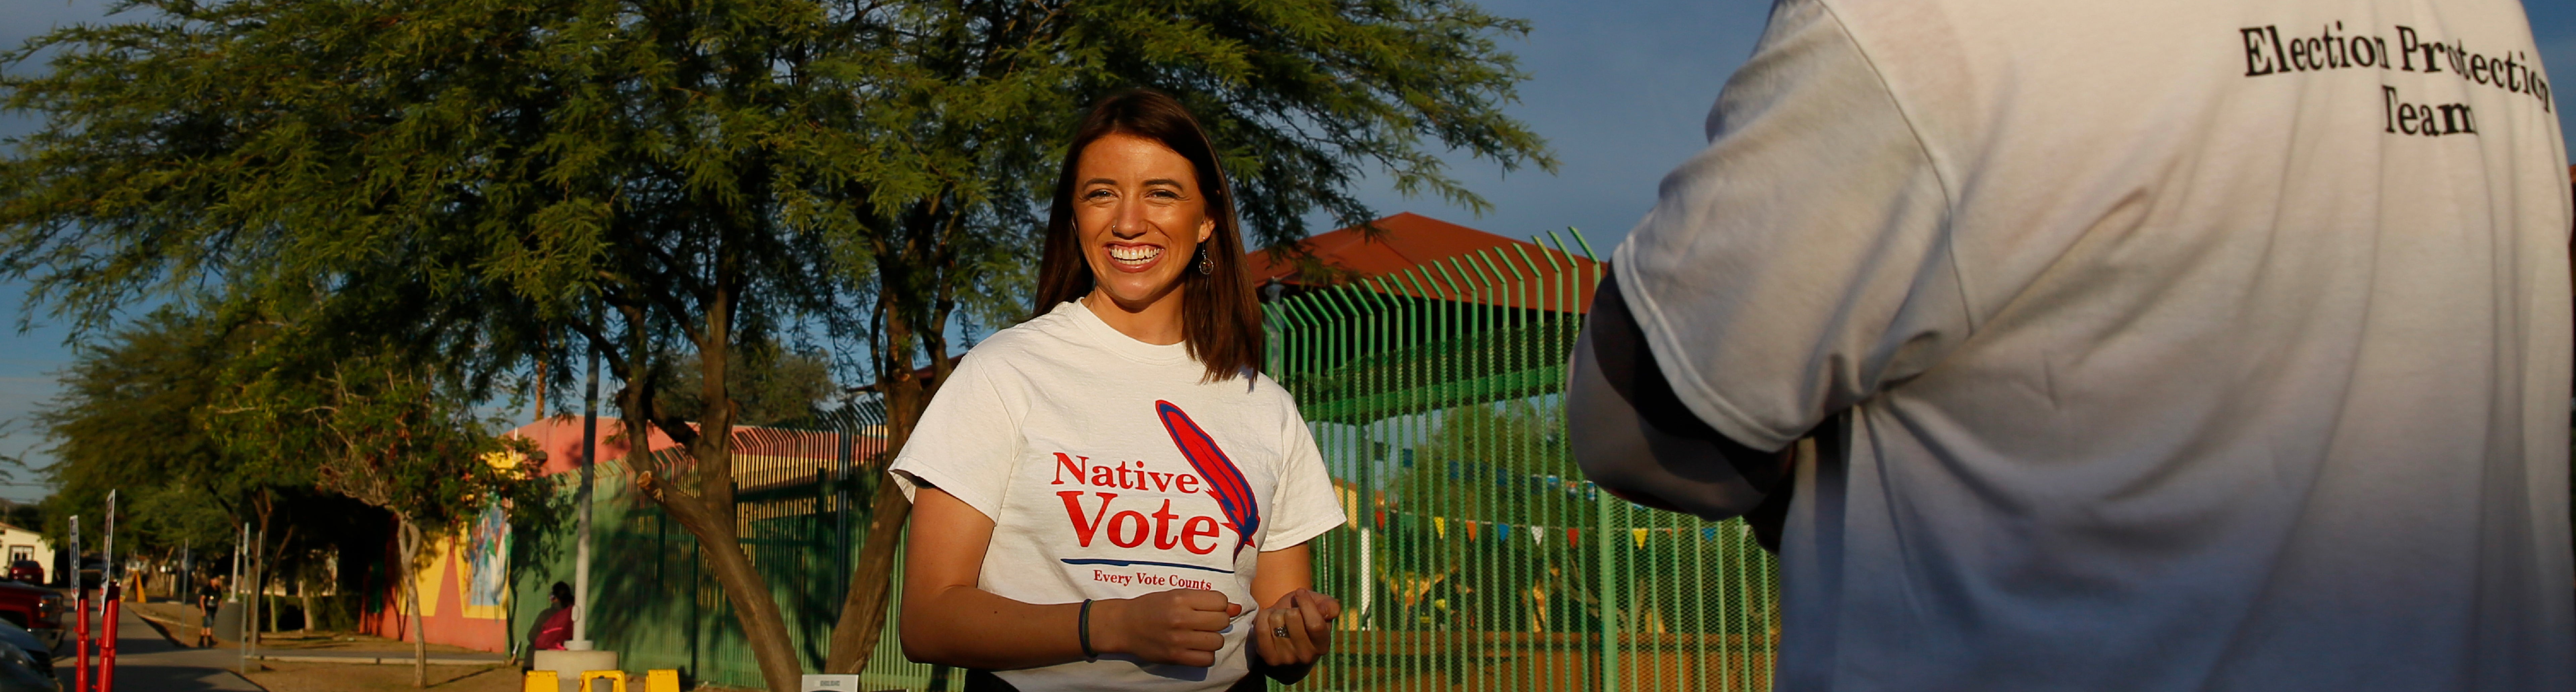 Woman smiling while wearing Native Vote shirt